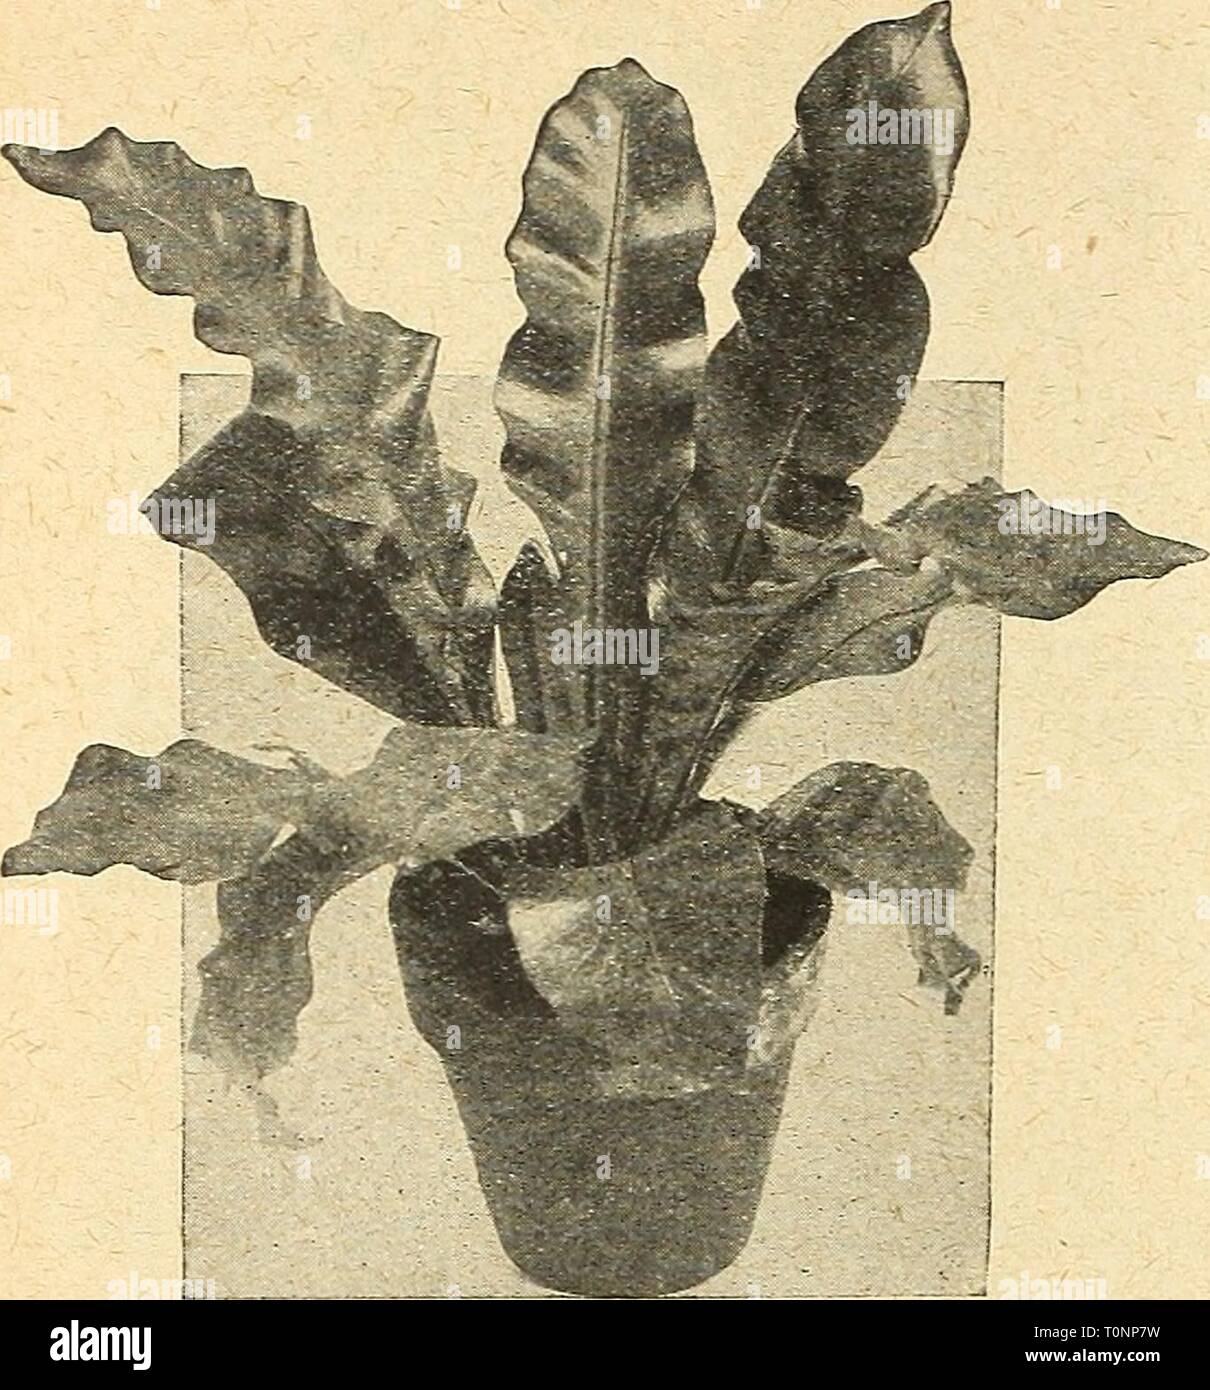 Dreer's autumn catalogue 1924 (1924) Dreer's autumn catalogue 1924  dreersautumncata1924henr Year: 1924  32 (flEHRyAJKEE^ ^ilLMlfl|    Aspi.ENiUM Nidus Avis (Bird's Nest Fern) Pteris Rivertoniana. The most distinct and desirable of the many crested forms of the Pteris. 2i-inch pots, 15 cts. each; 4-inch pots, 50 cts. each. Pteris Victoriae. Has narrow graceful foliage of a deep green color elegantly variegated with silvery-white, one of the prettiest of the variegated varieties. 4-inch pots, 50 cts. each. Pteris Wilsoni. Of compact habit, forming a very symmetrical plant. The bright green foli Stock Photo